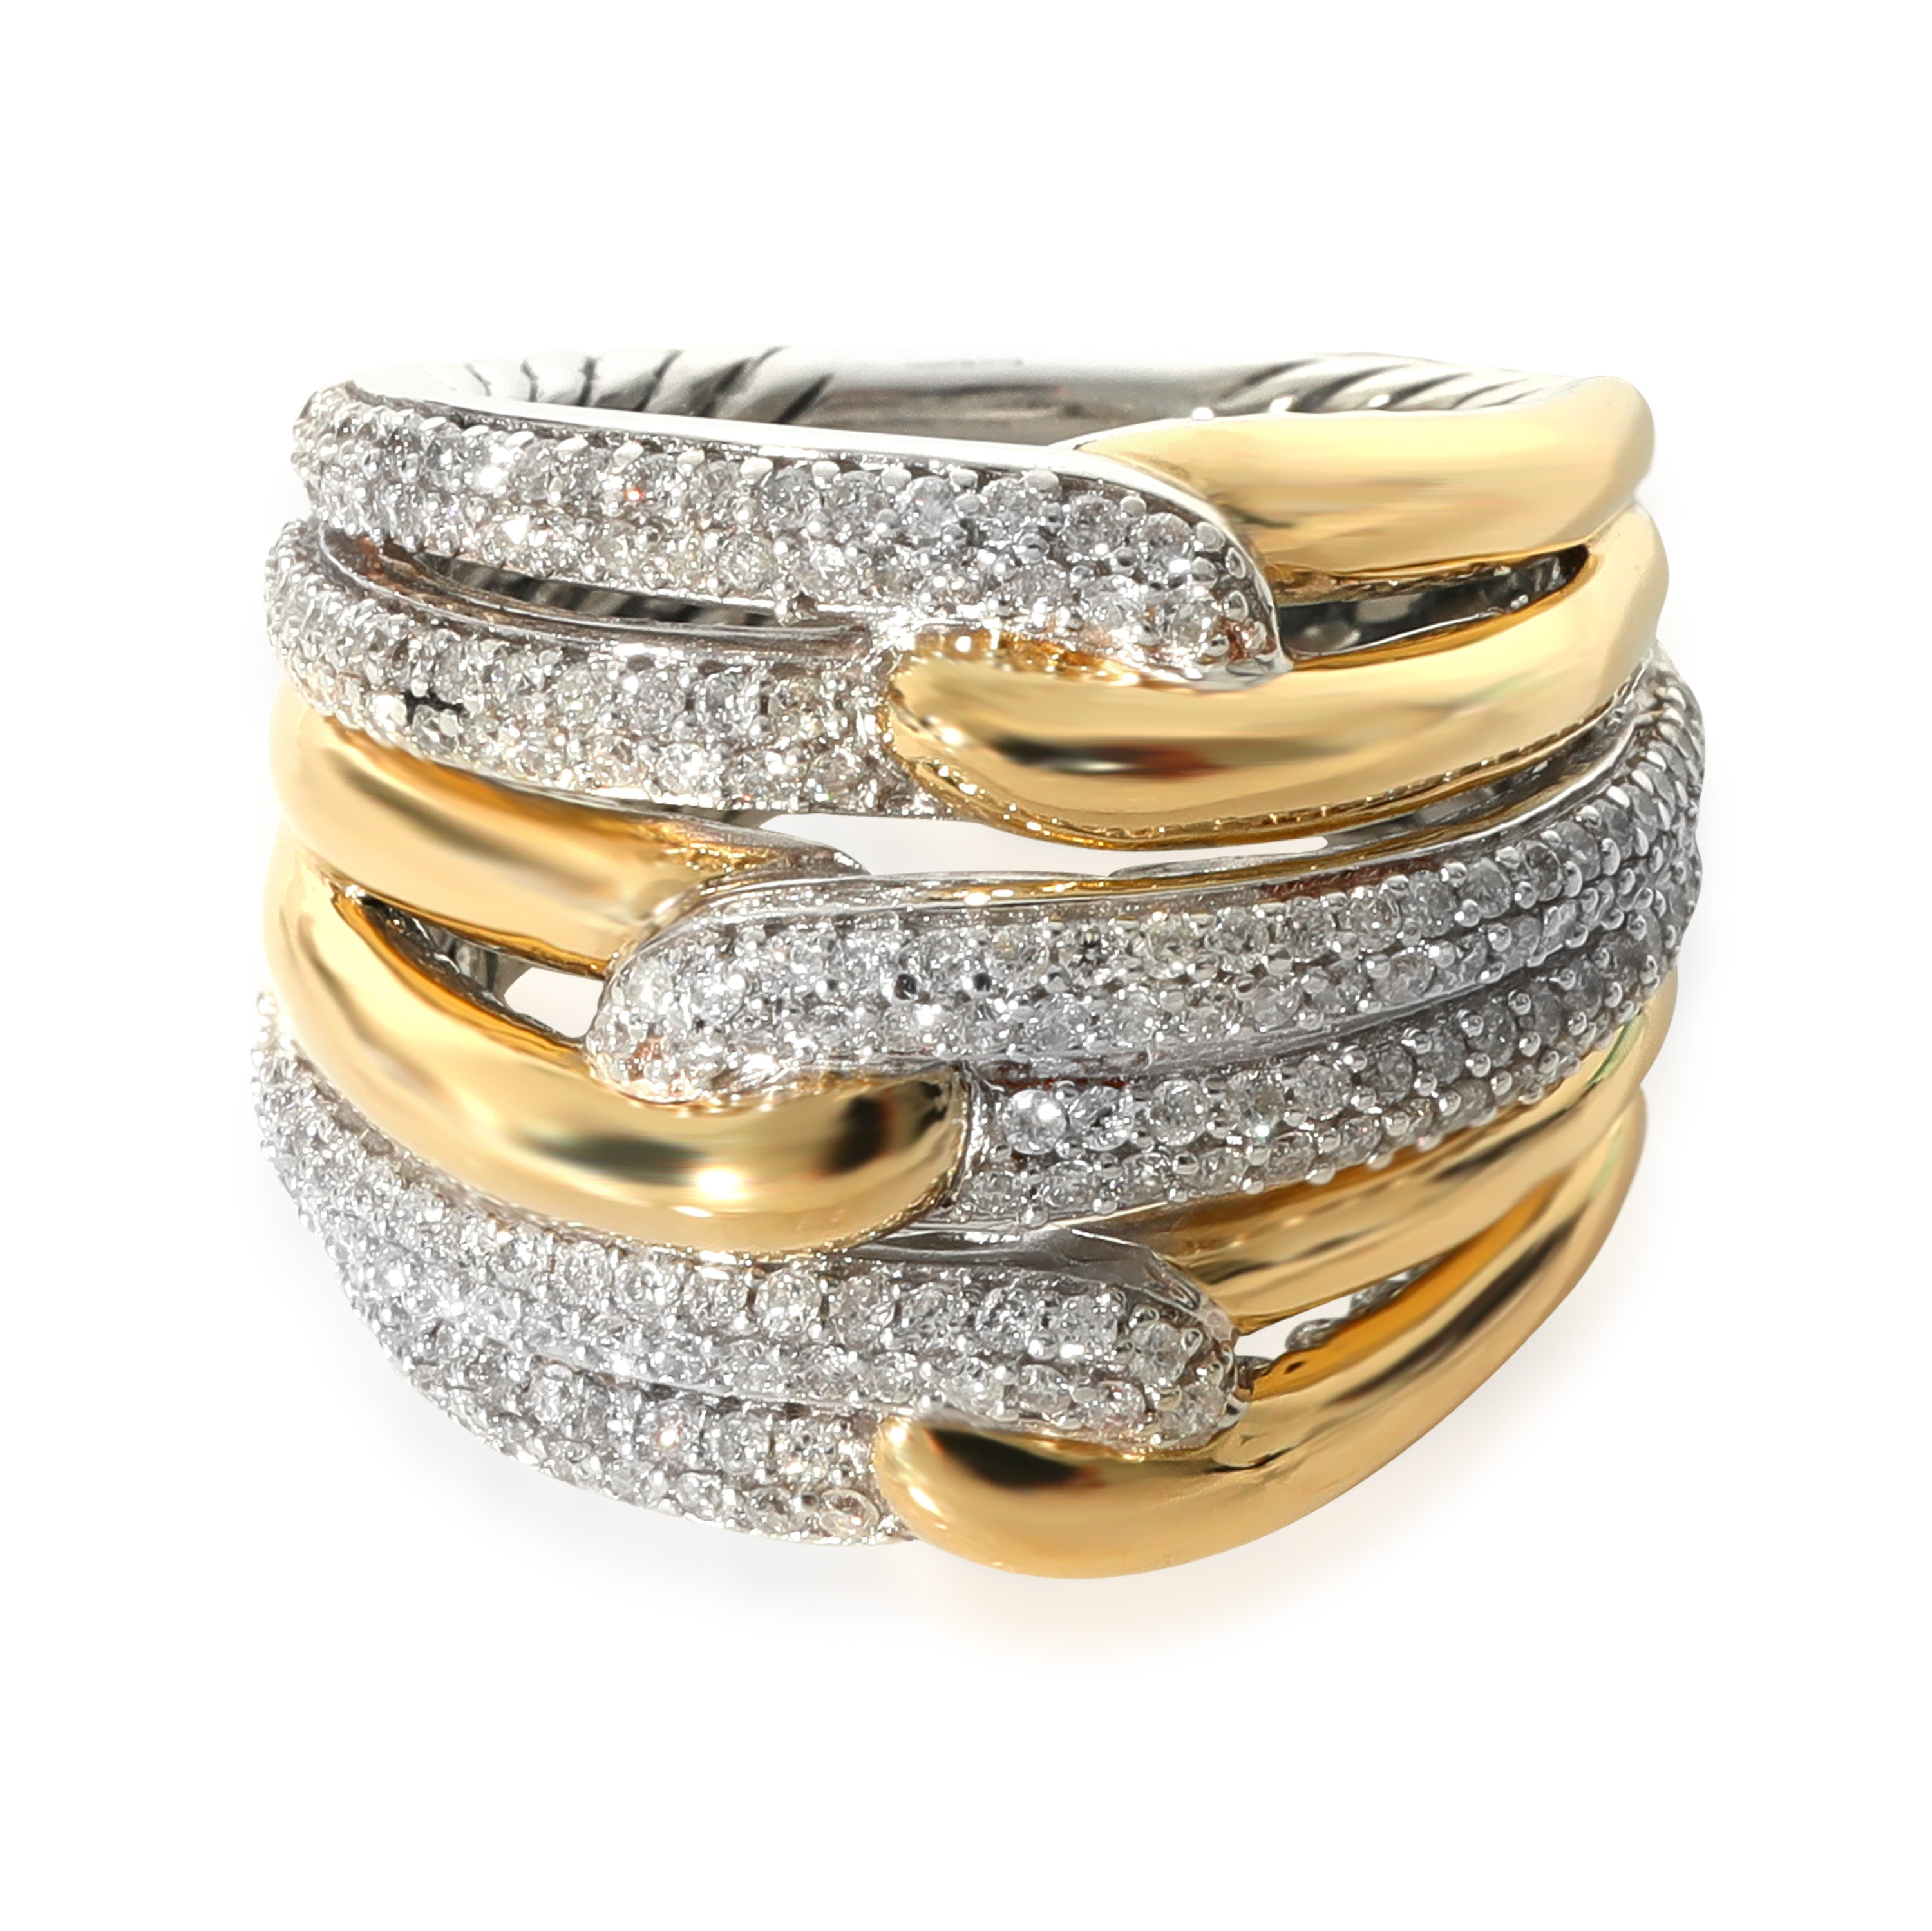 Empreinte Bangle, Yellow Gold And Pave Diamonds - Jewelry - Categories